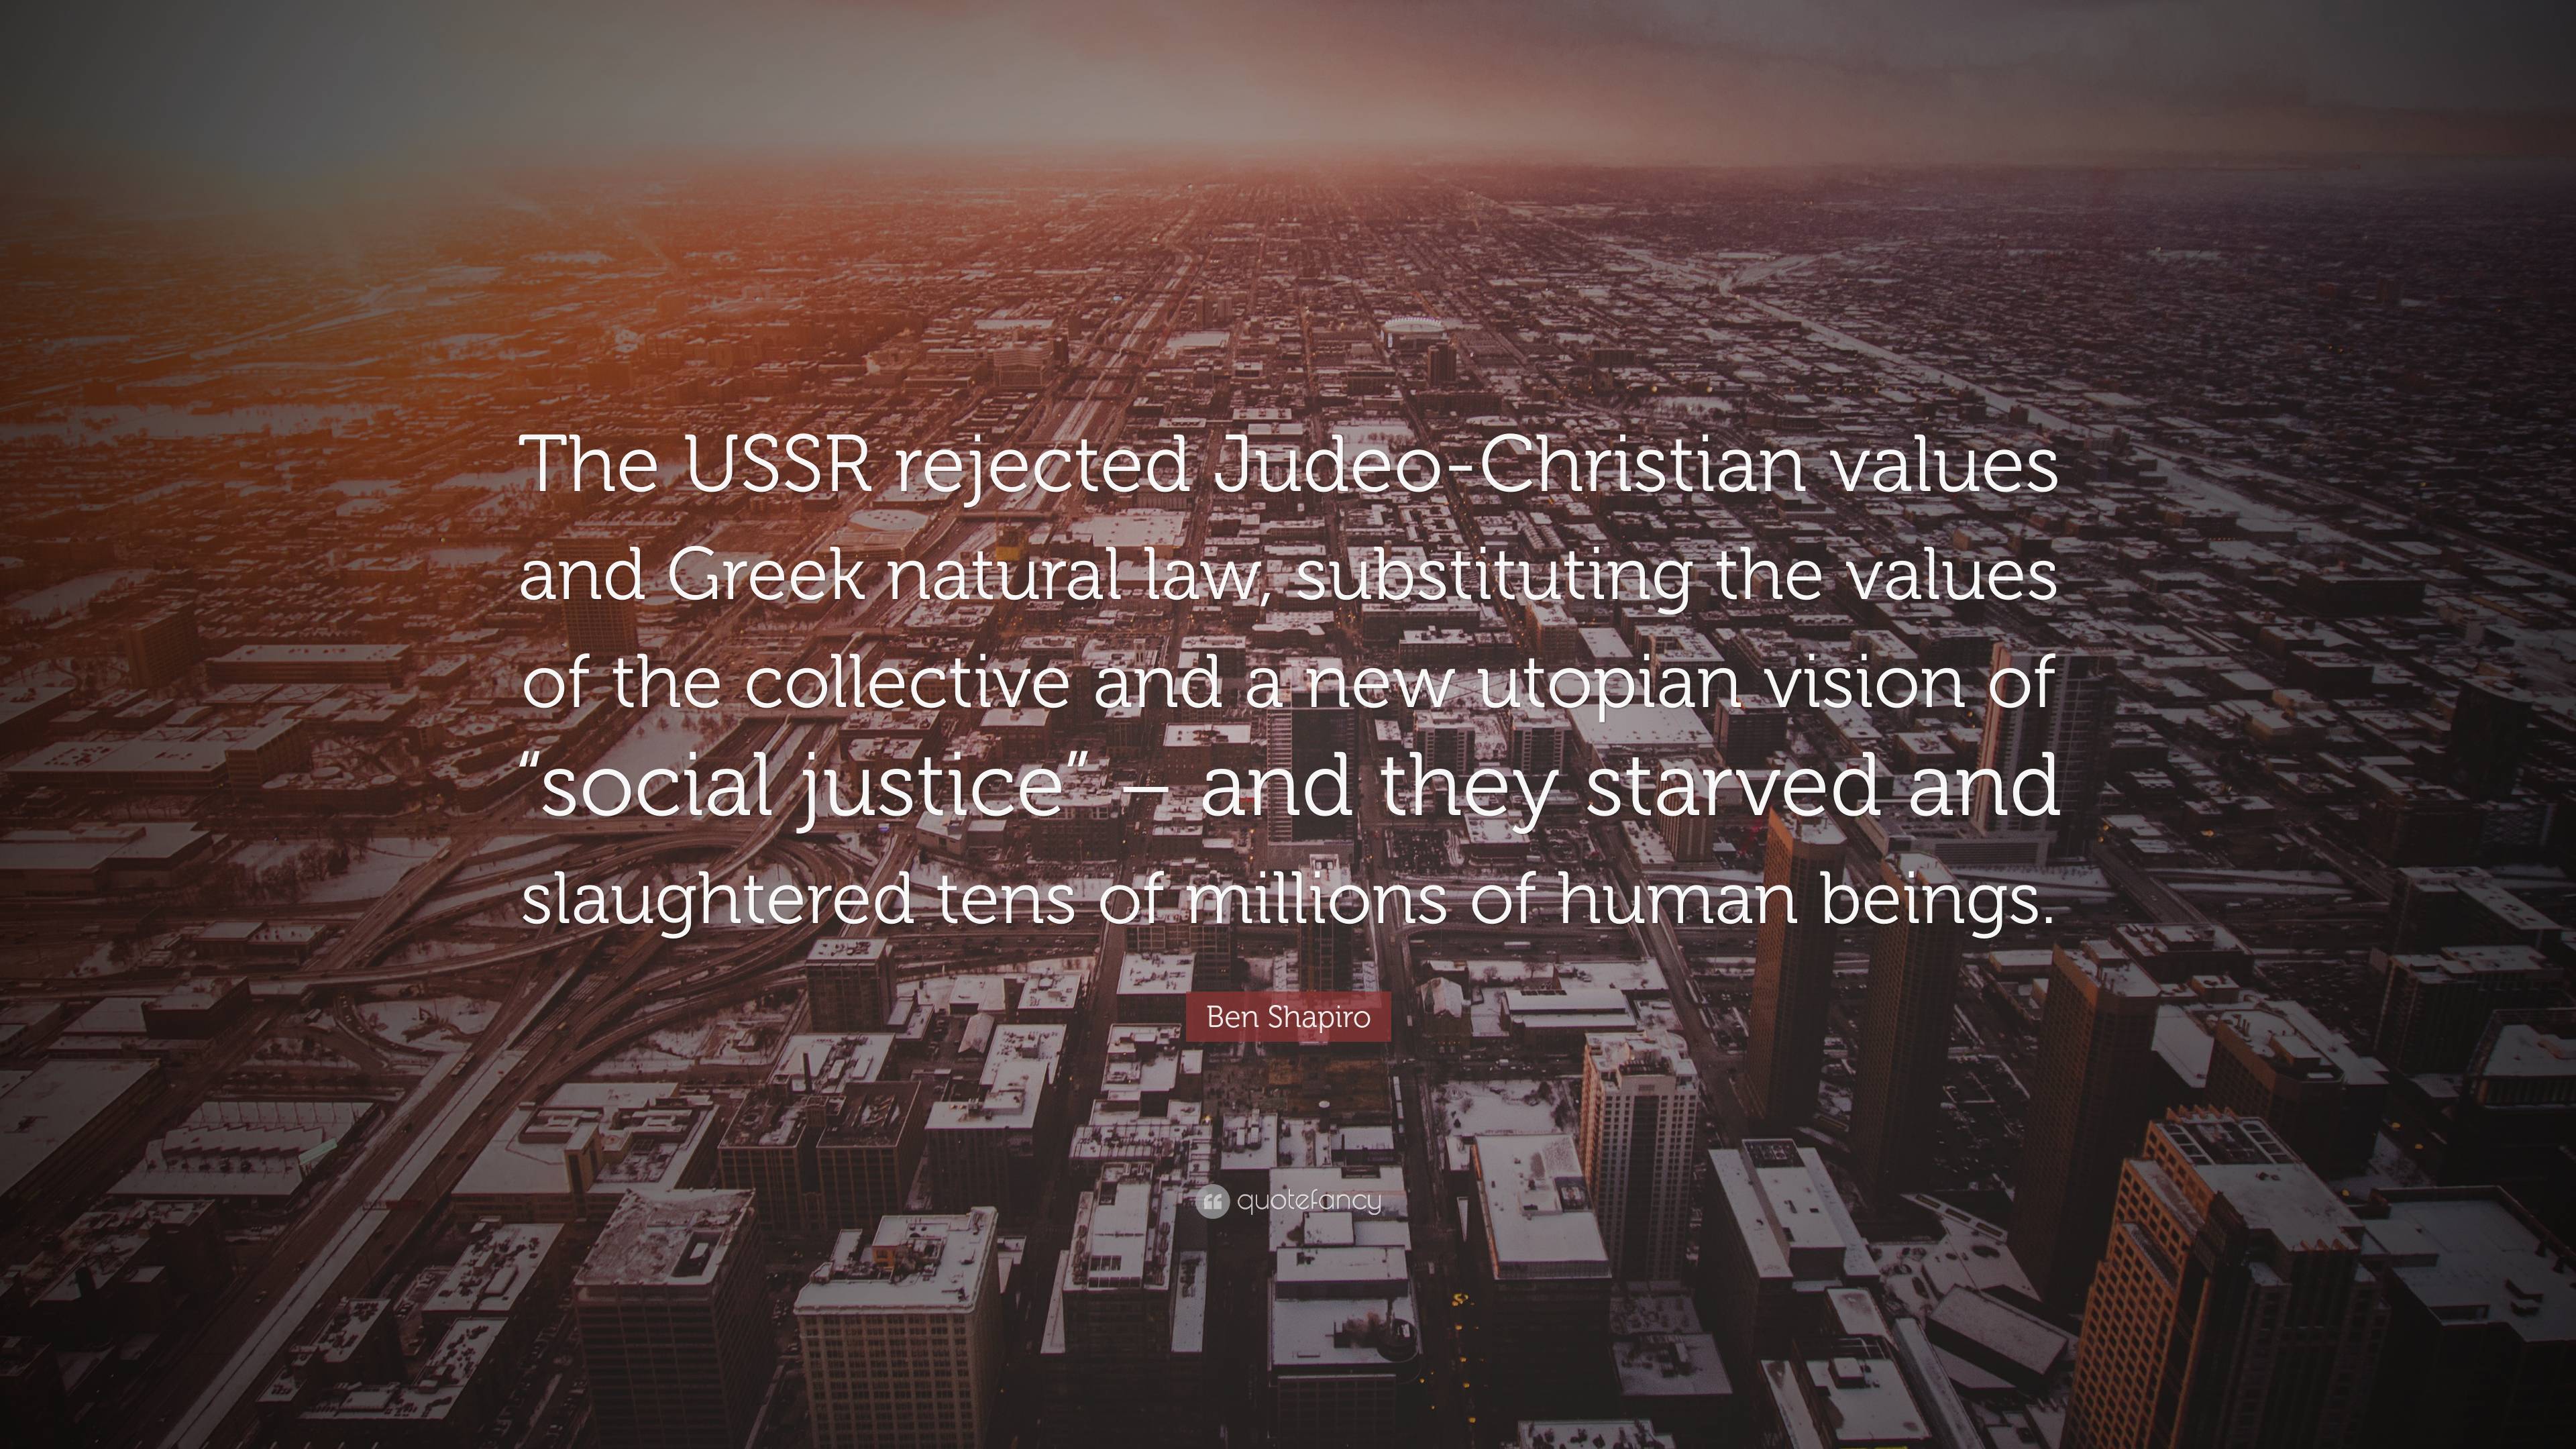 Ben Shapiro Quote: “The USSR Rejected Judeo Christian Values And Greek Natural Law, Substituting The Values Of The Collective And A New Utop.”